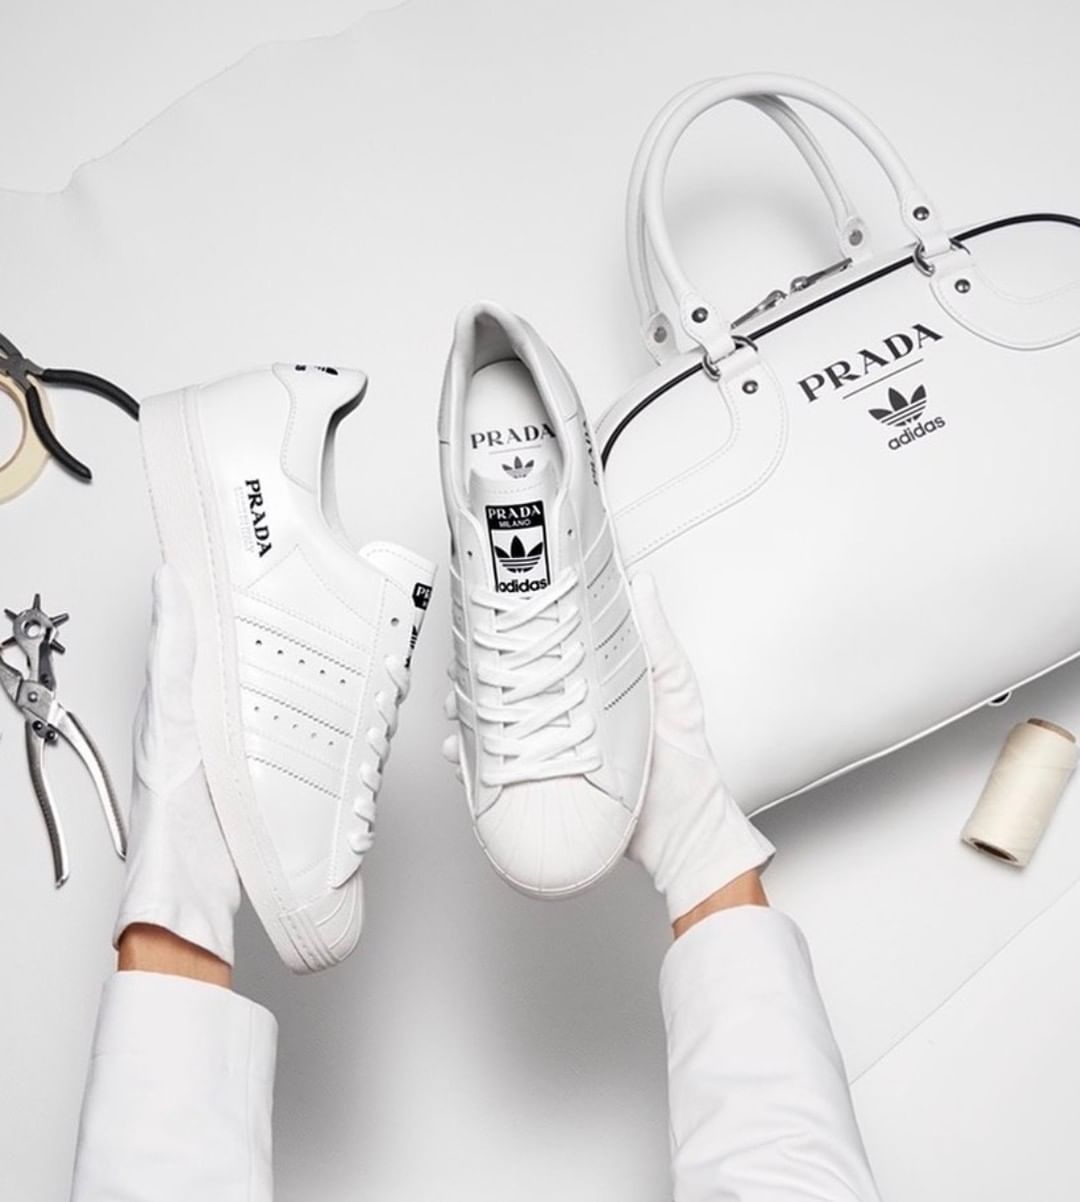 Adidas white shoes and bag in collaboration with Prada